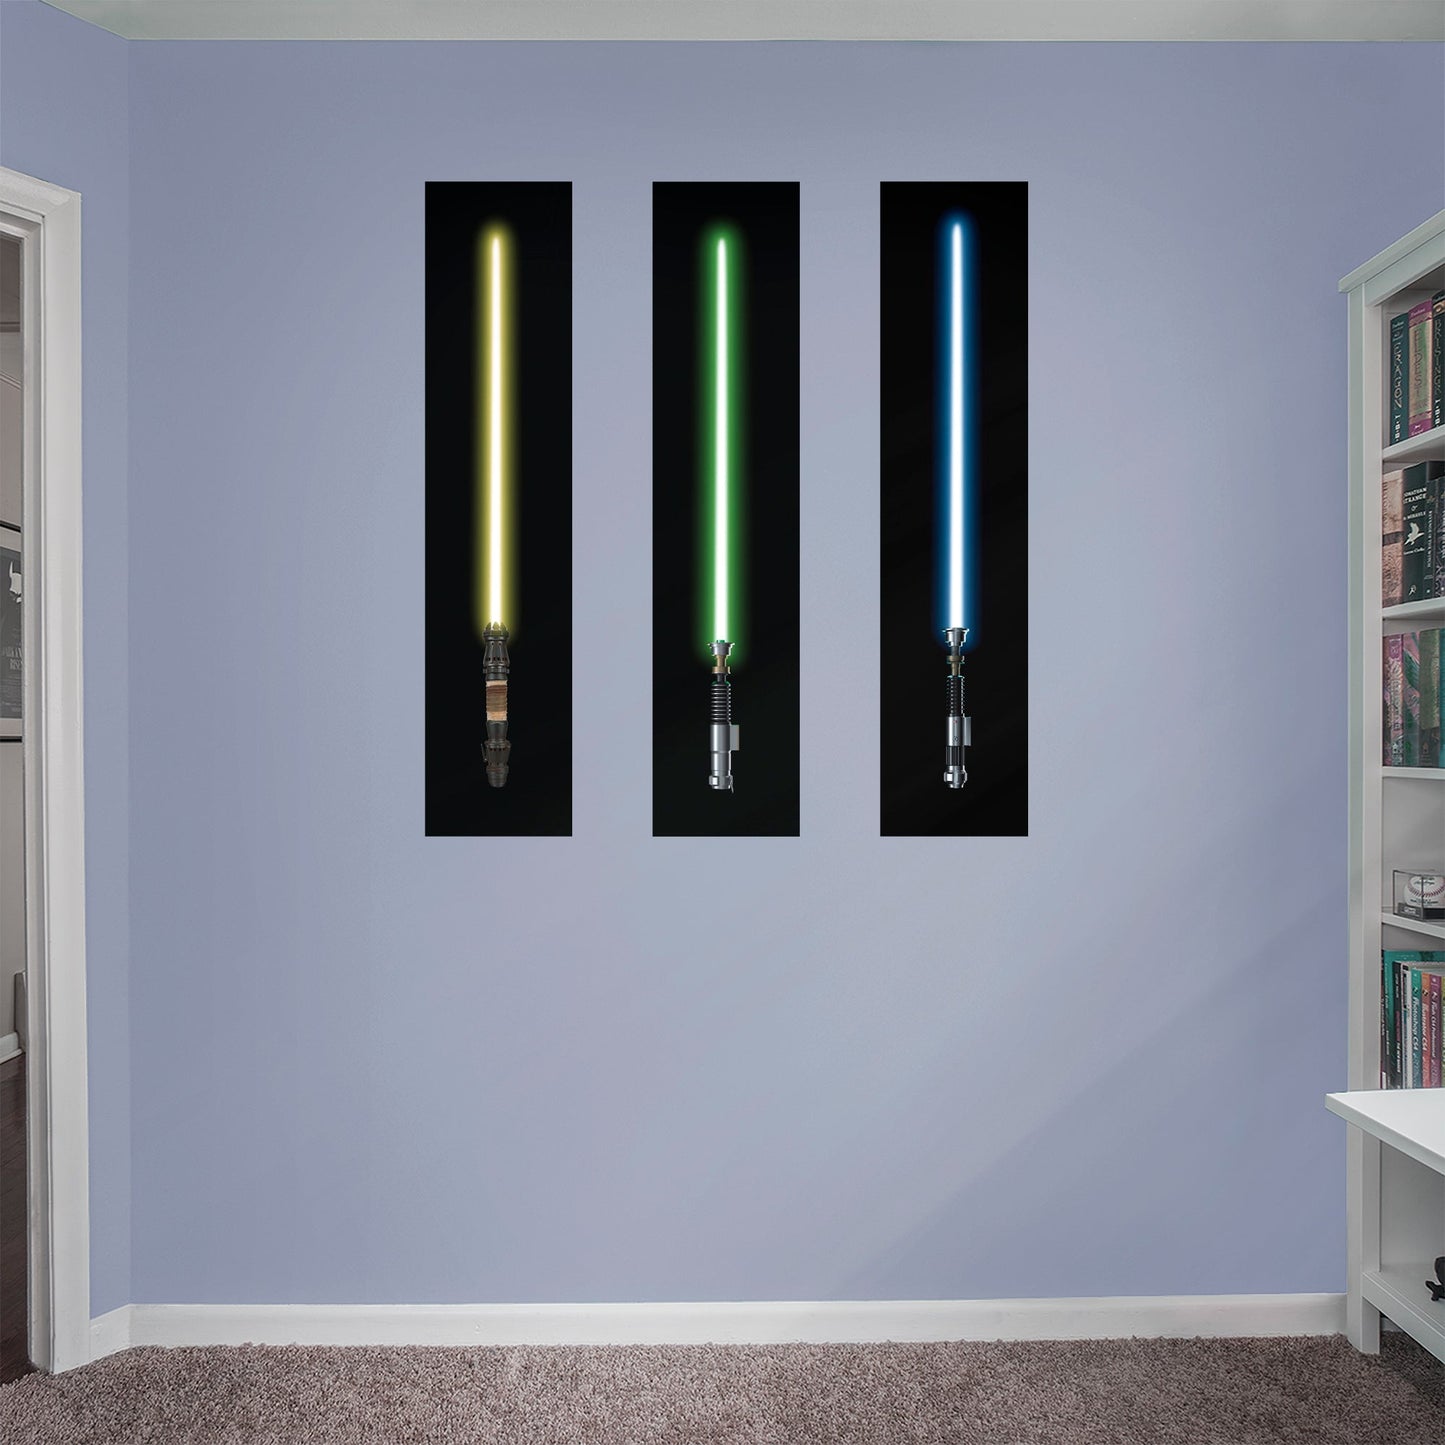 Jedi Lightsaber Mural        - Officially Licensed Star Wars Removable Wall   Adhesive Decal